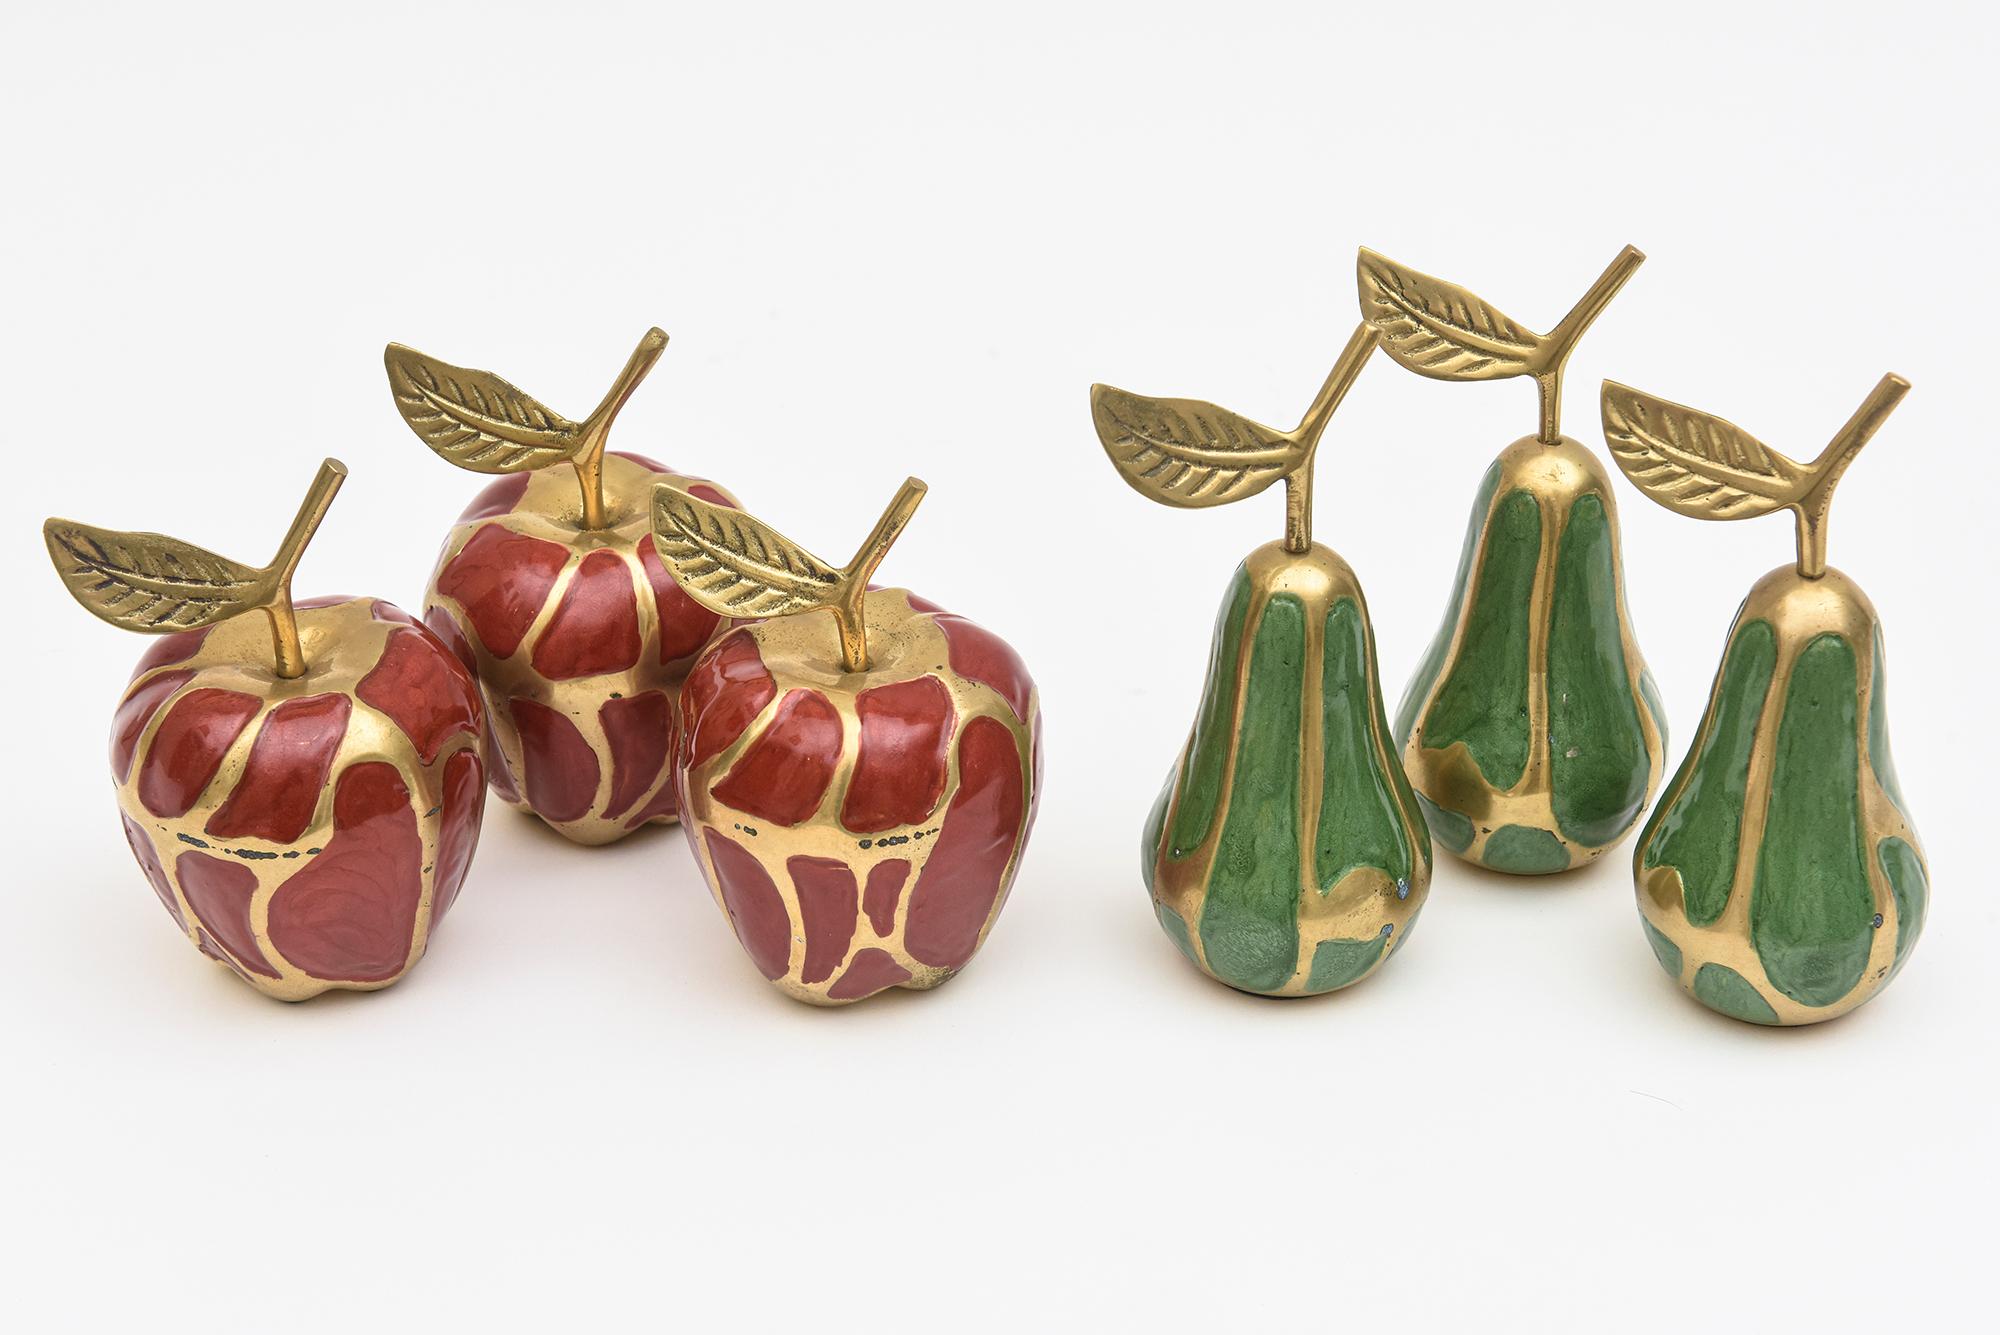 This lovely set of 6 enameled and brass apple and pear object sculptures makes for great entertaining and table settings. They are vintage from the 70's. Well made. Sold as a set of six only! There are 3 of each fruit. These will make a great